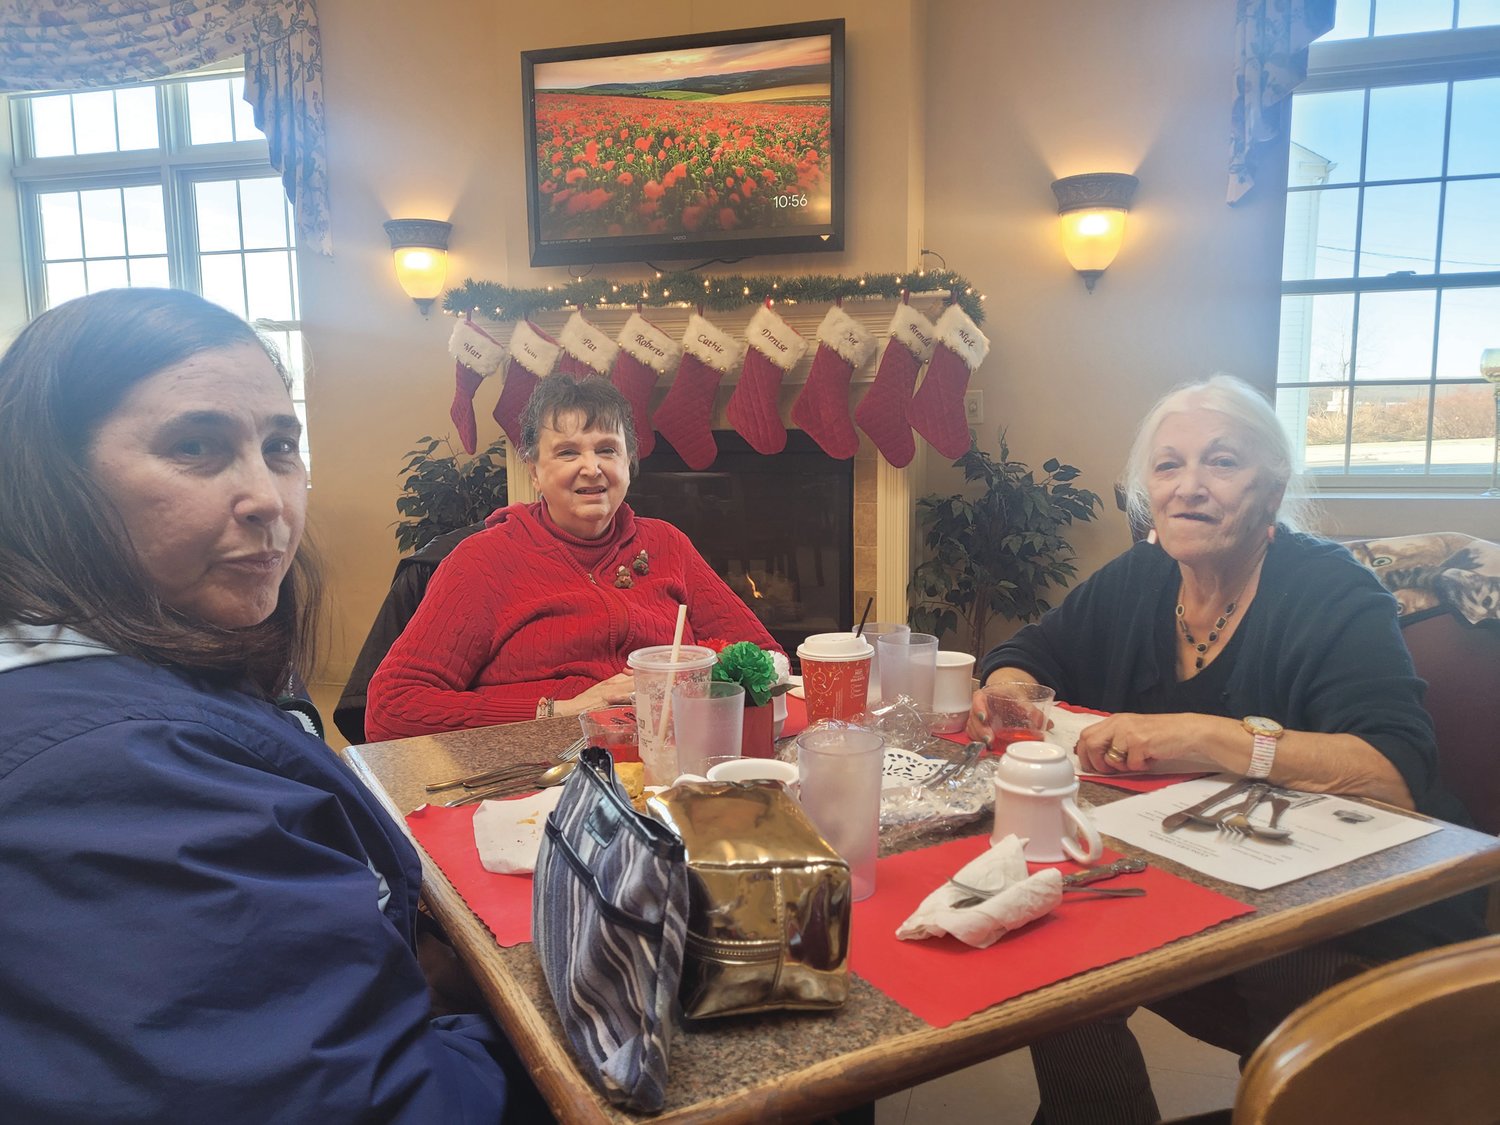 HOLIDAY SMILES: Dawn Renzi, Pat Baxter and Gloria Renzi anxiously awaited the afternoon’s entertainment.